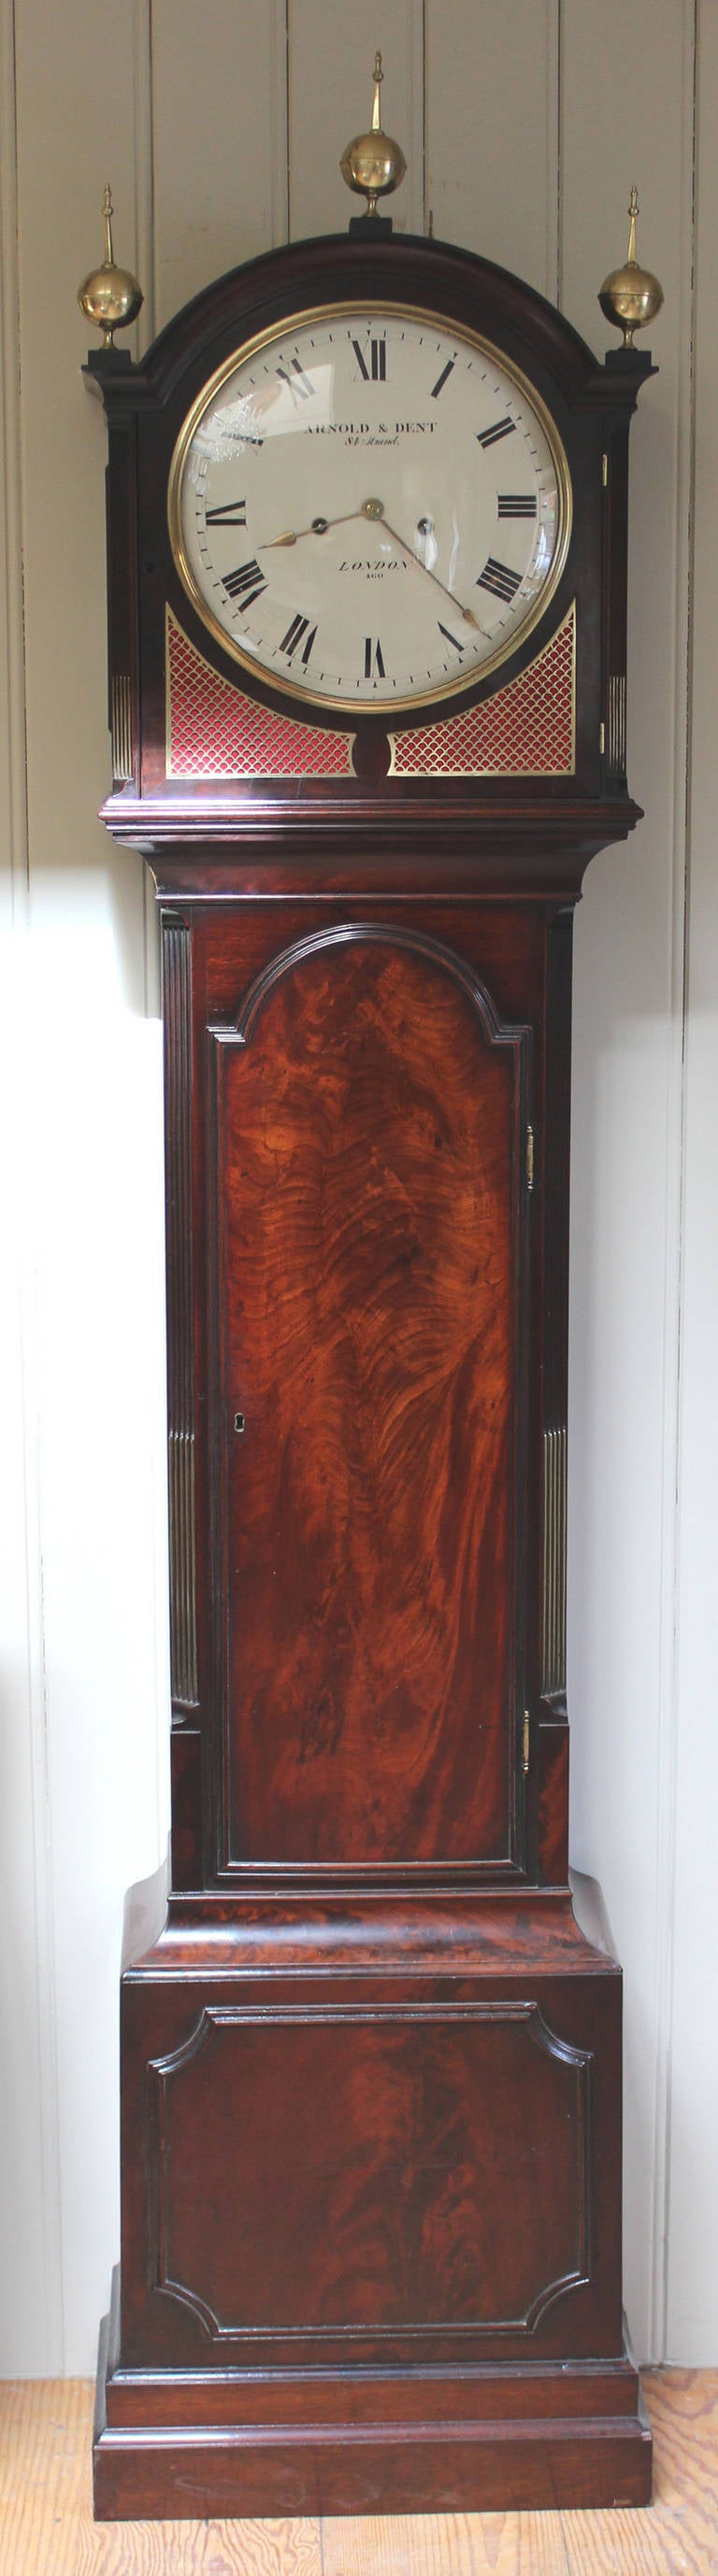 A fine and original, well proportioned mahogany longcase clock made by Arnold and Dent numbered 460. It has a break arch hood mounted by three brass finials, brass fish scale fret panels and a white convex dial with a convex glass. The case has a